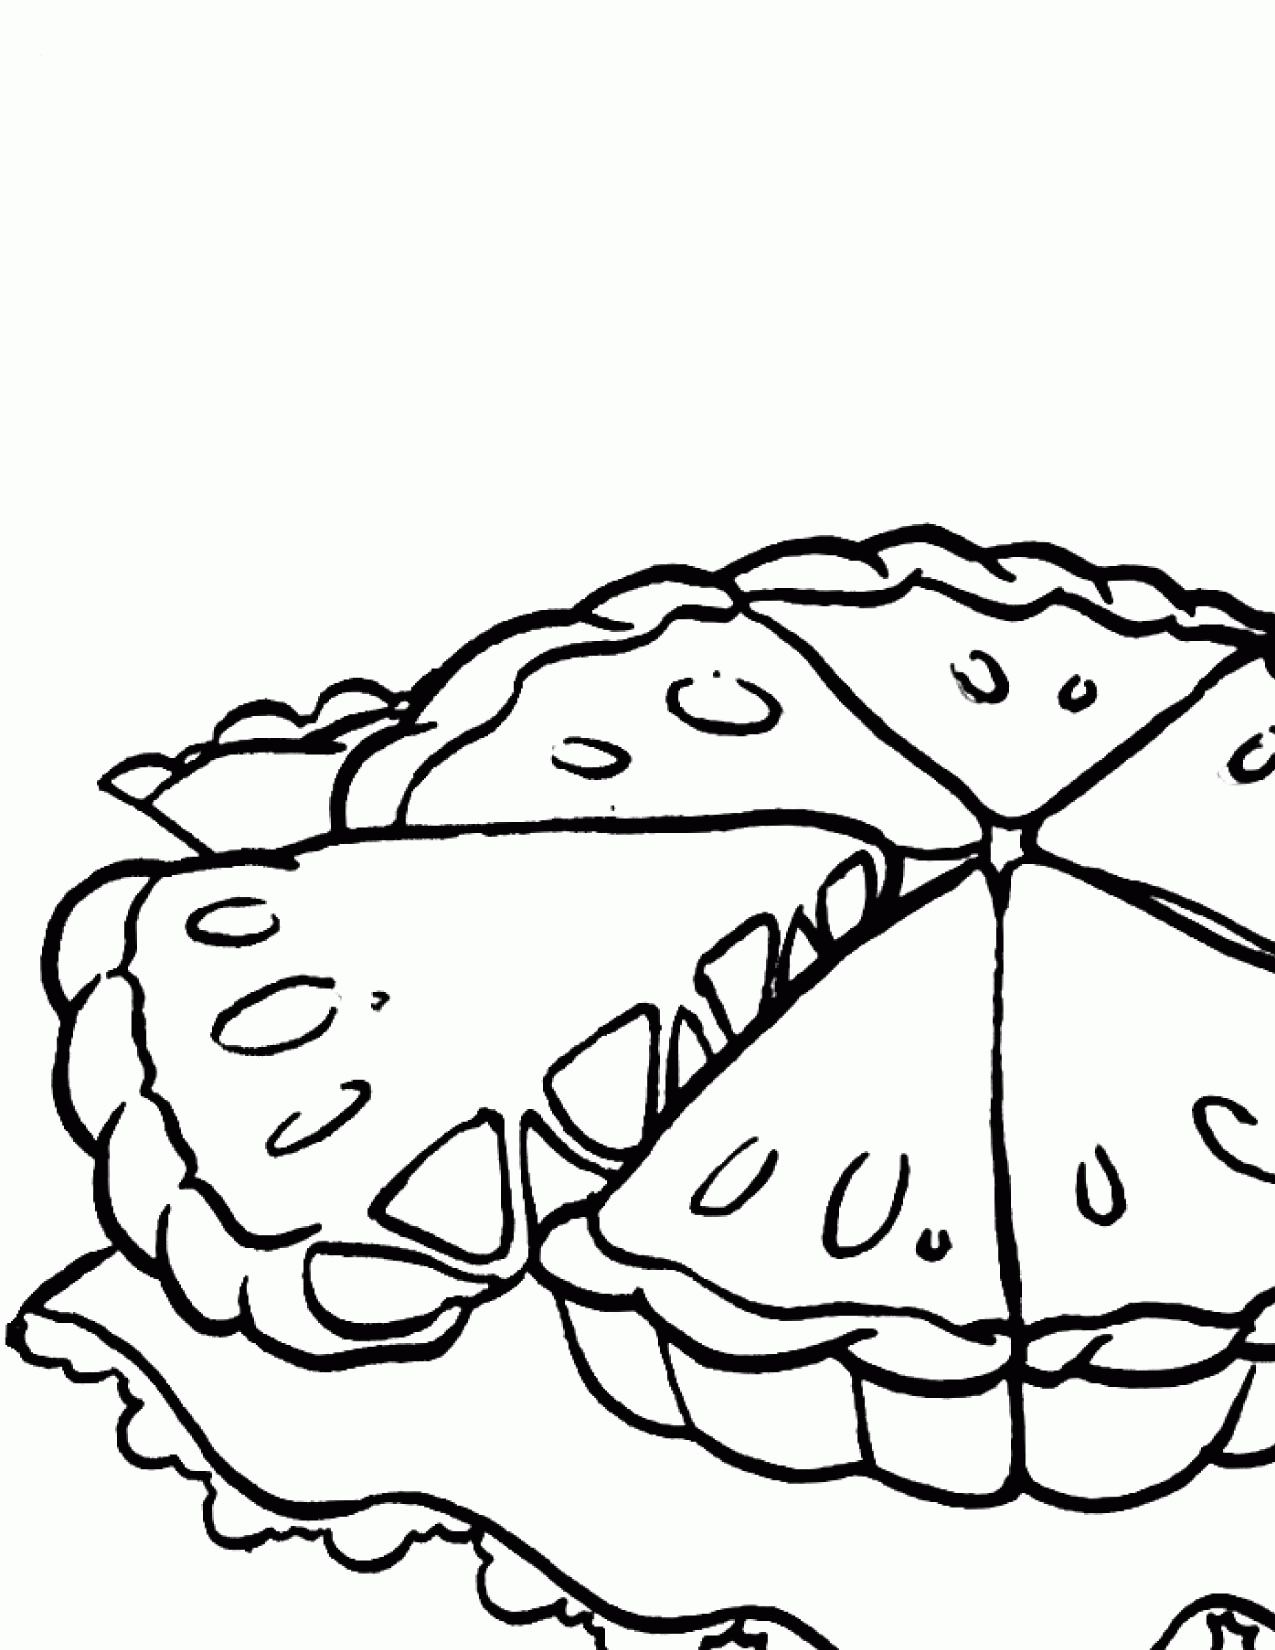 Pie - Coloring Pages for Kids and for Adults